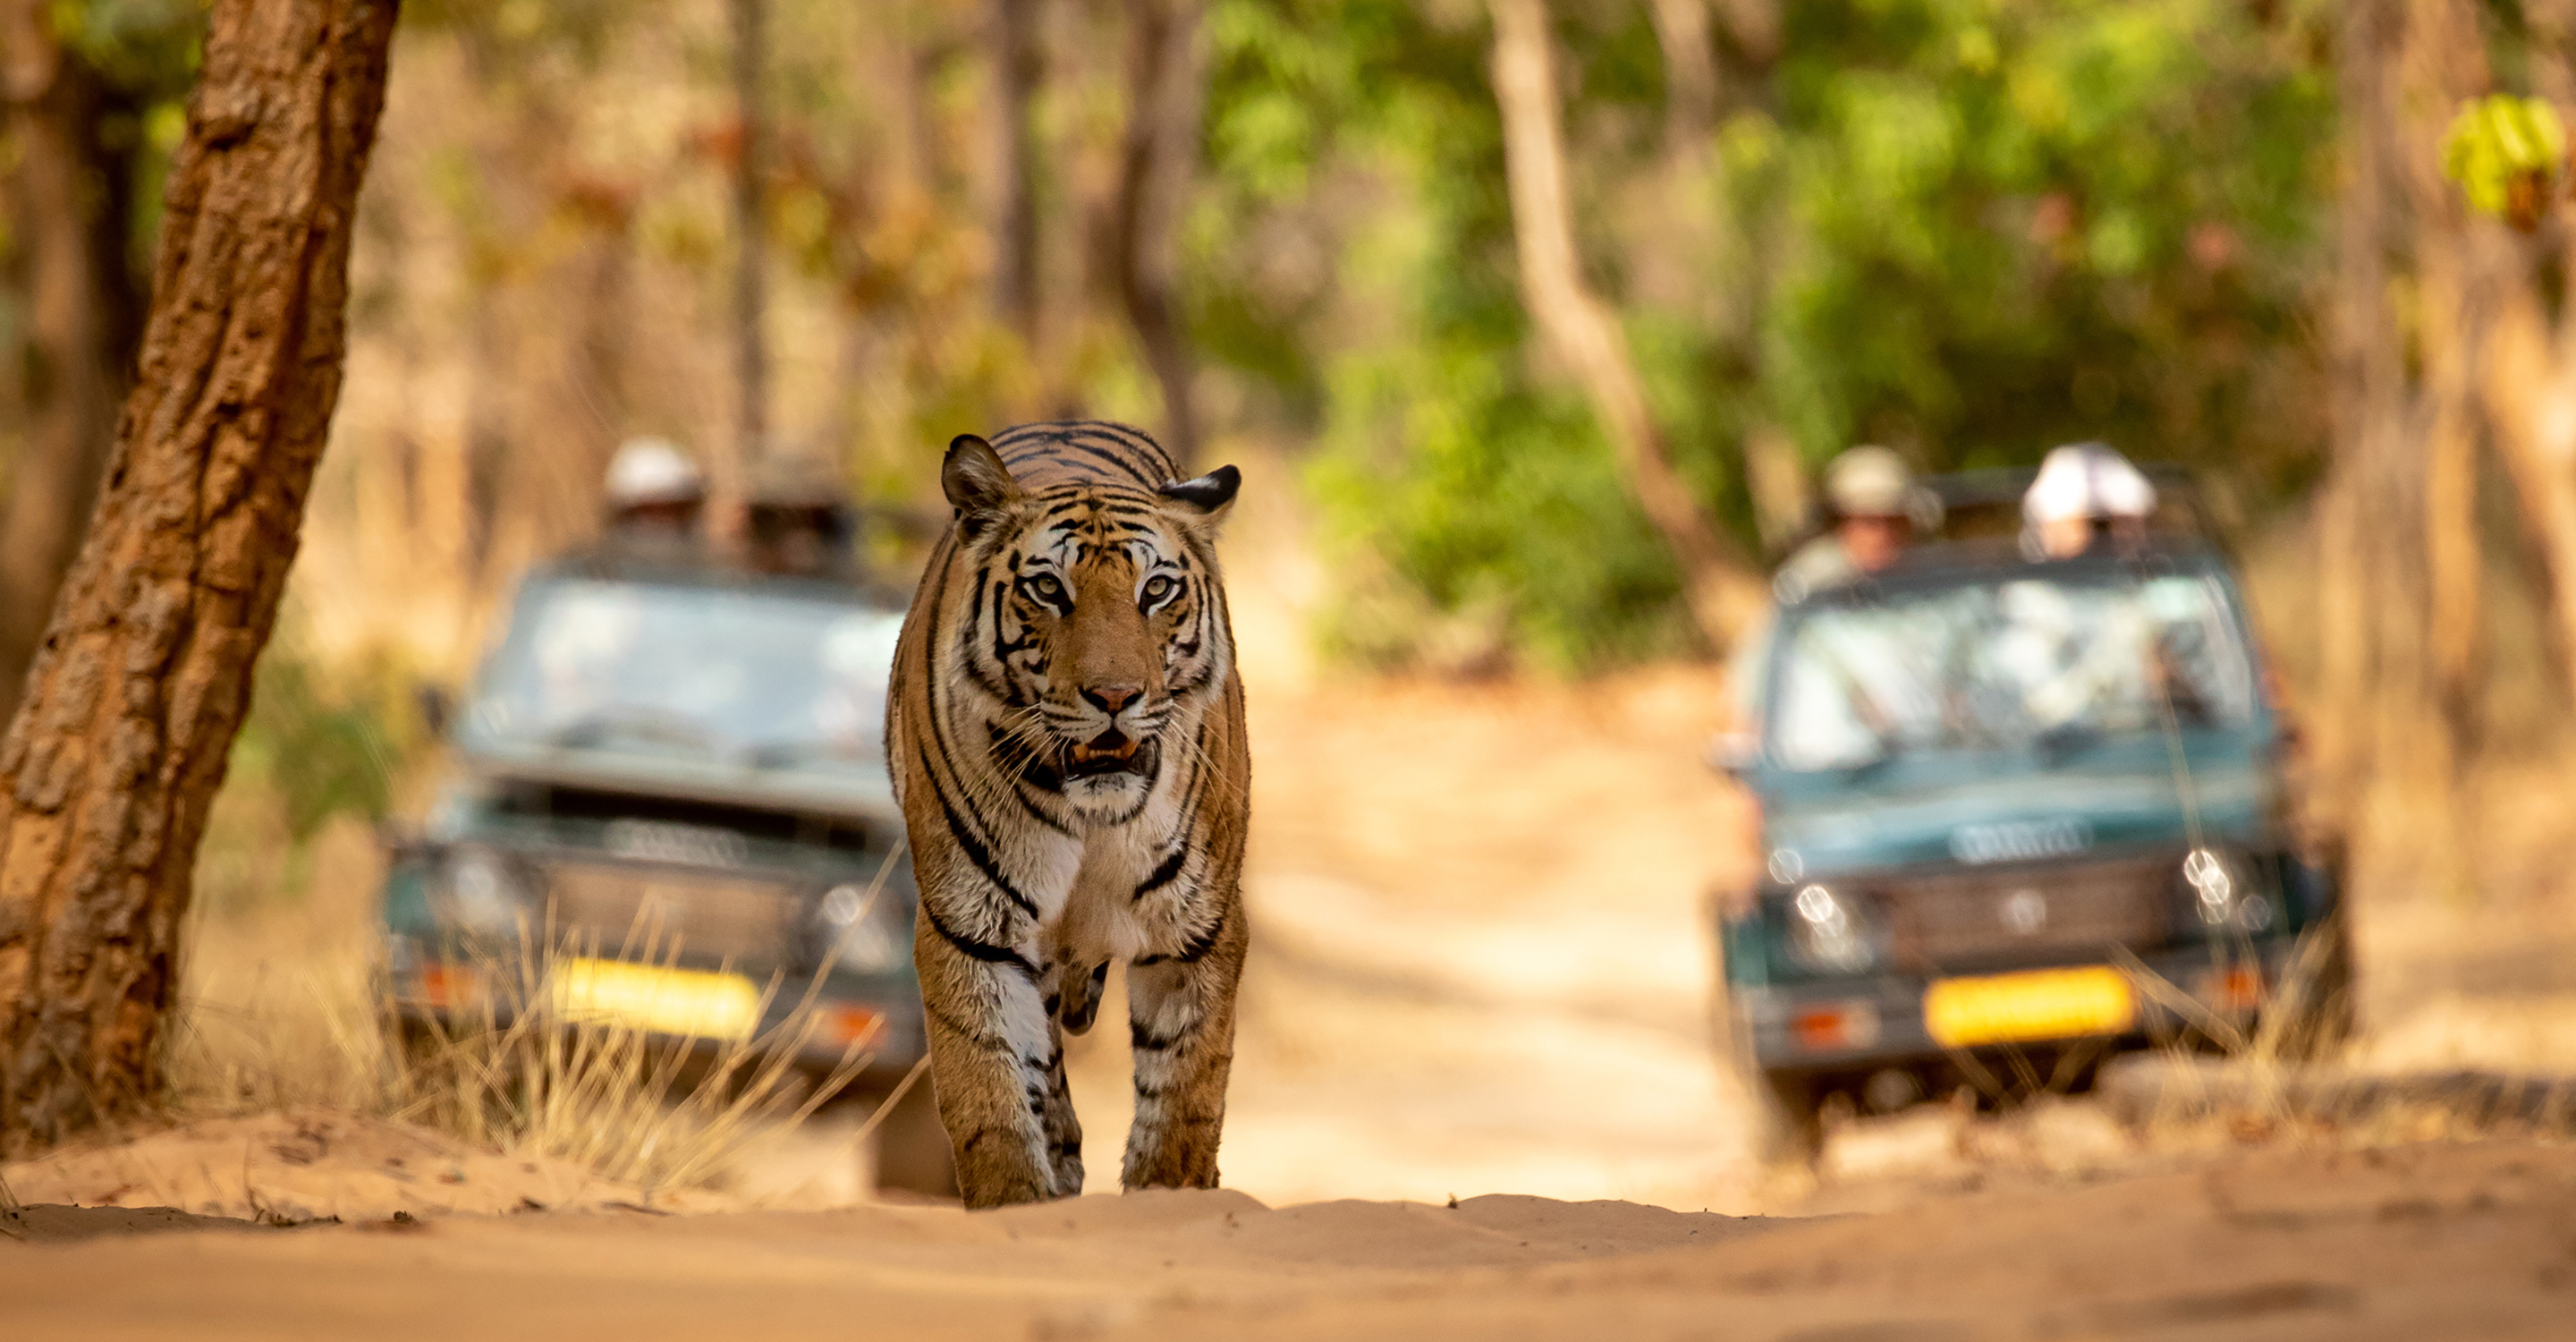 A tiger walks along a dirt road away from safari jeeps in Ranthambore National Park, India